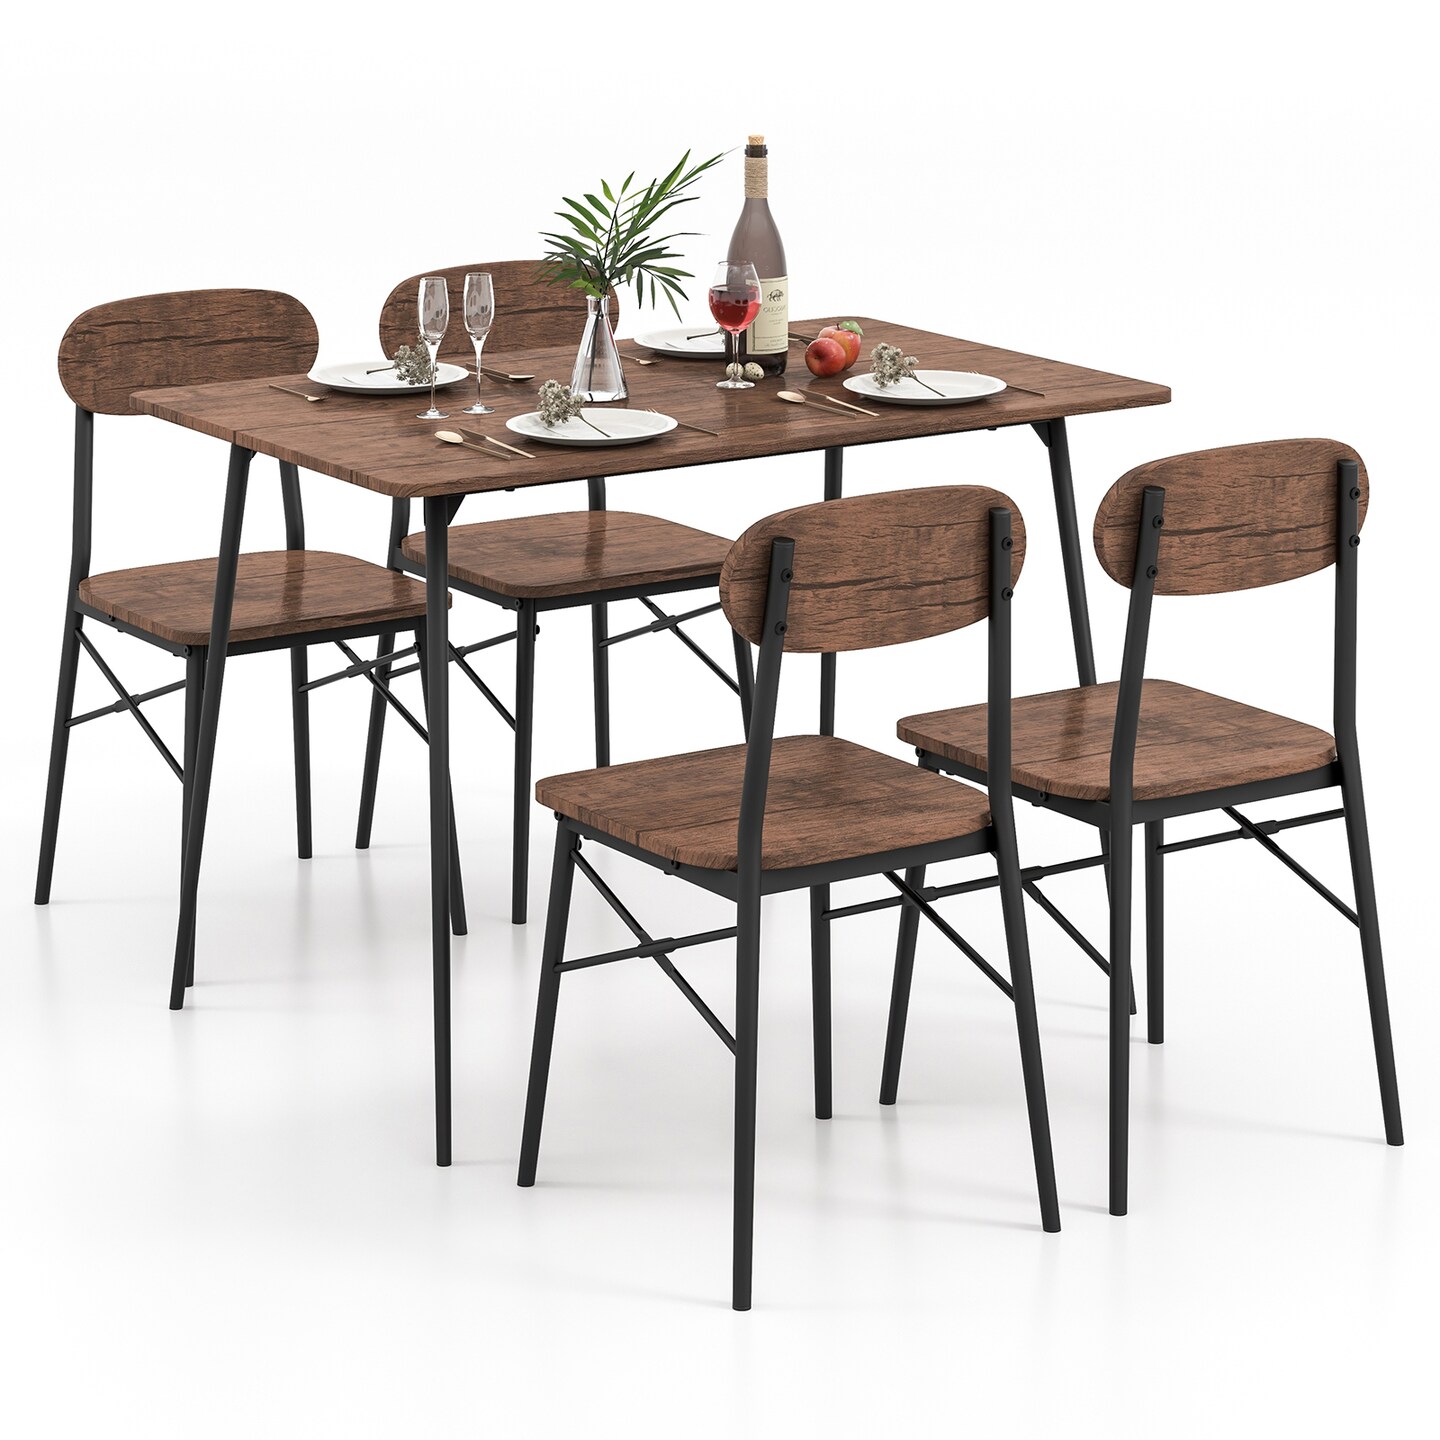 5 Piece Dining Table Set Rectangular With Backrest And Metal Legs For Breakfast Nook